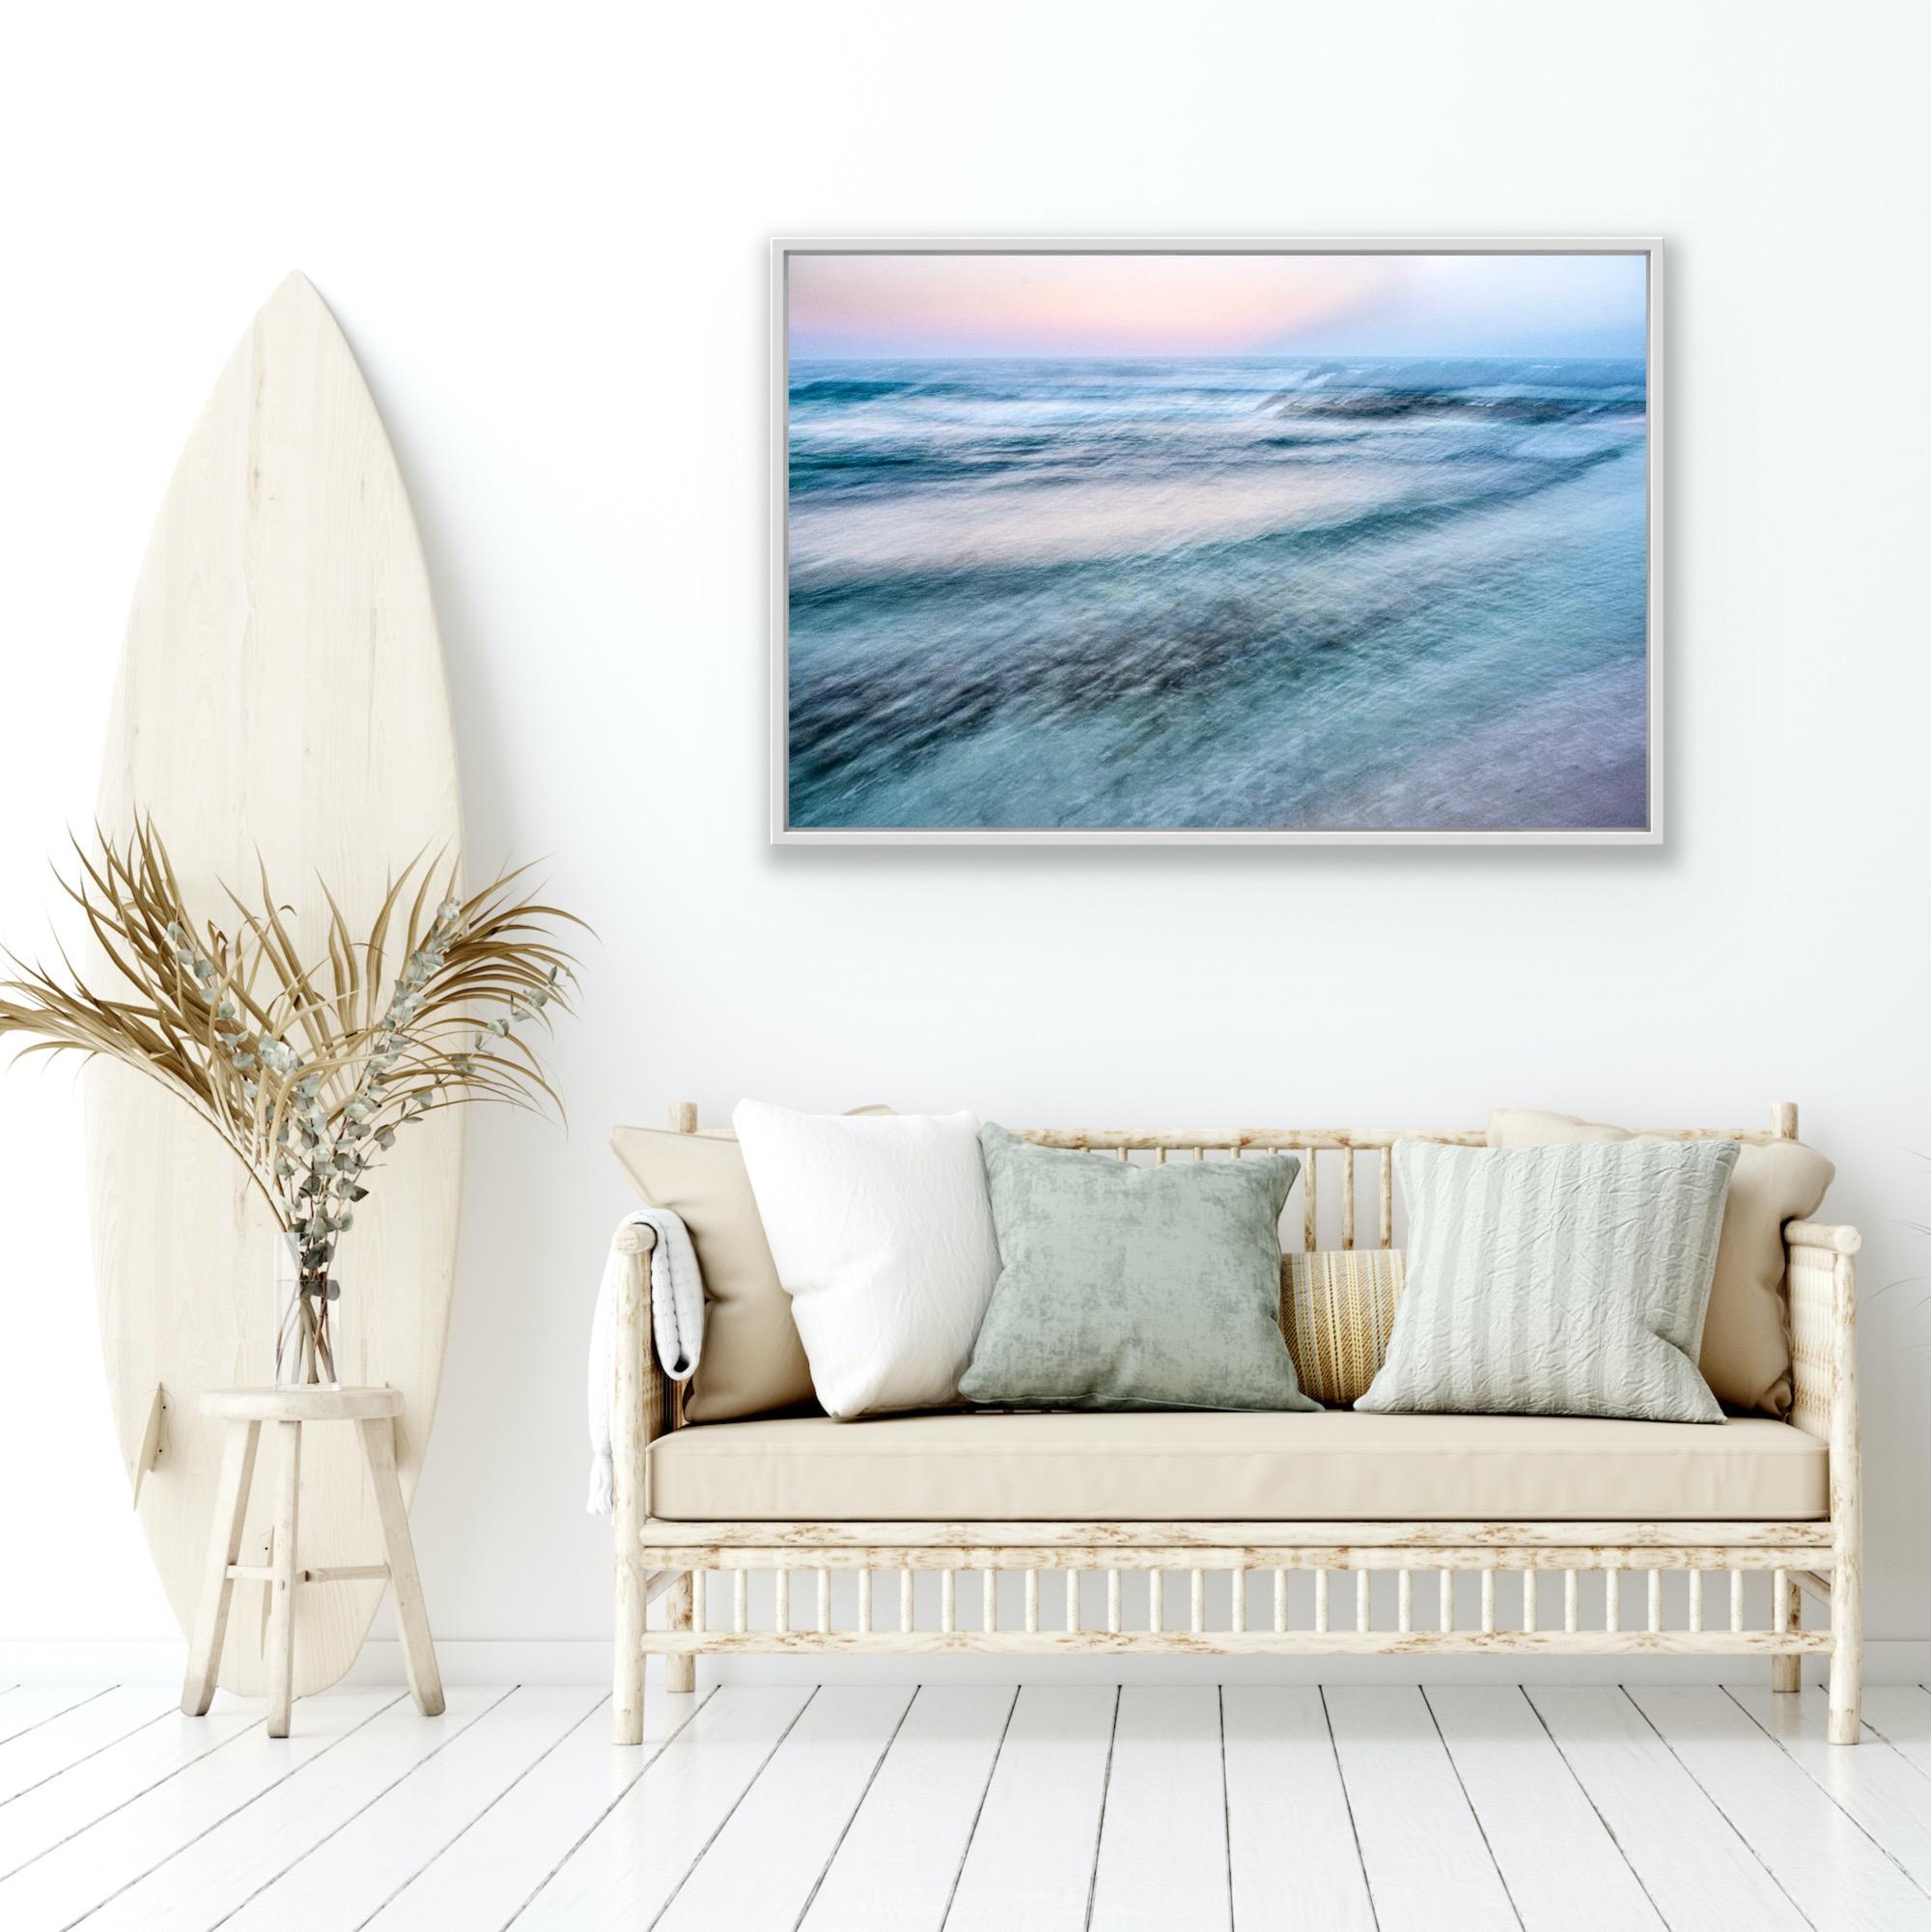 Peaceful evening on the ocean, Isla Mujeres, Mexico. 

Fine art photo mounted on di-bond aluminum. Custom printing/mounting/framing options available upon request. 